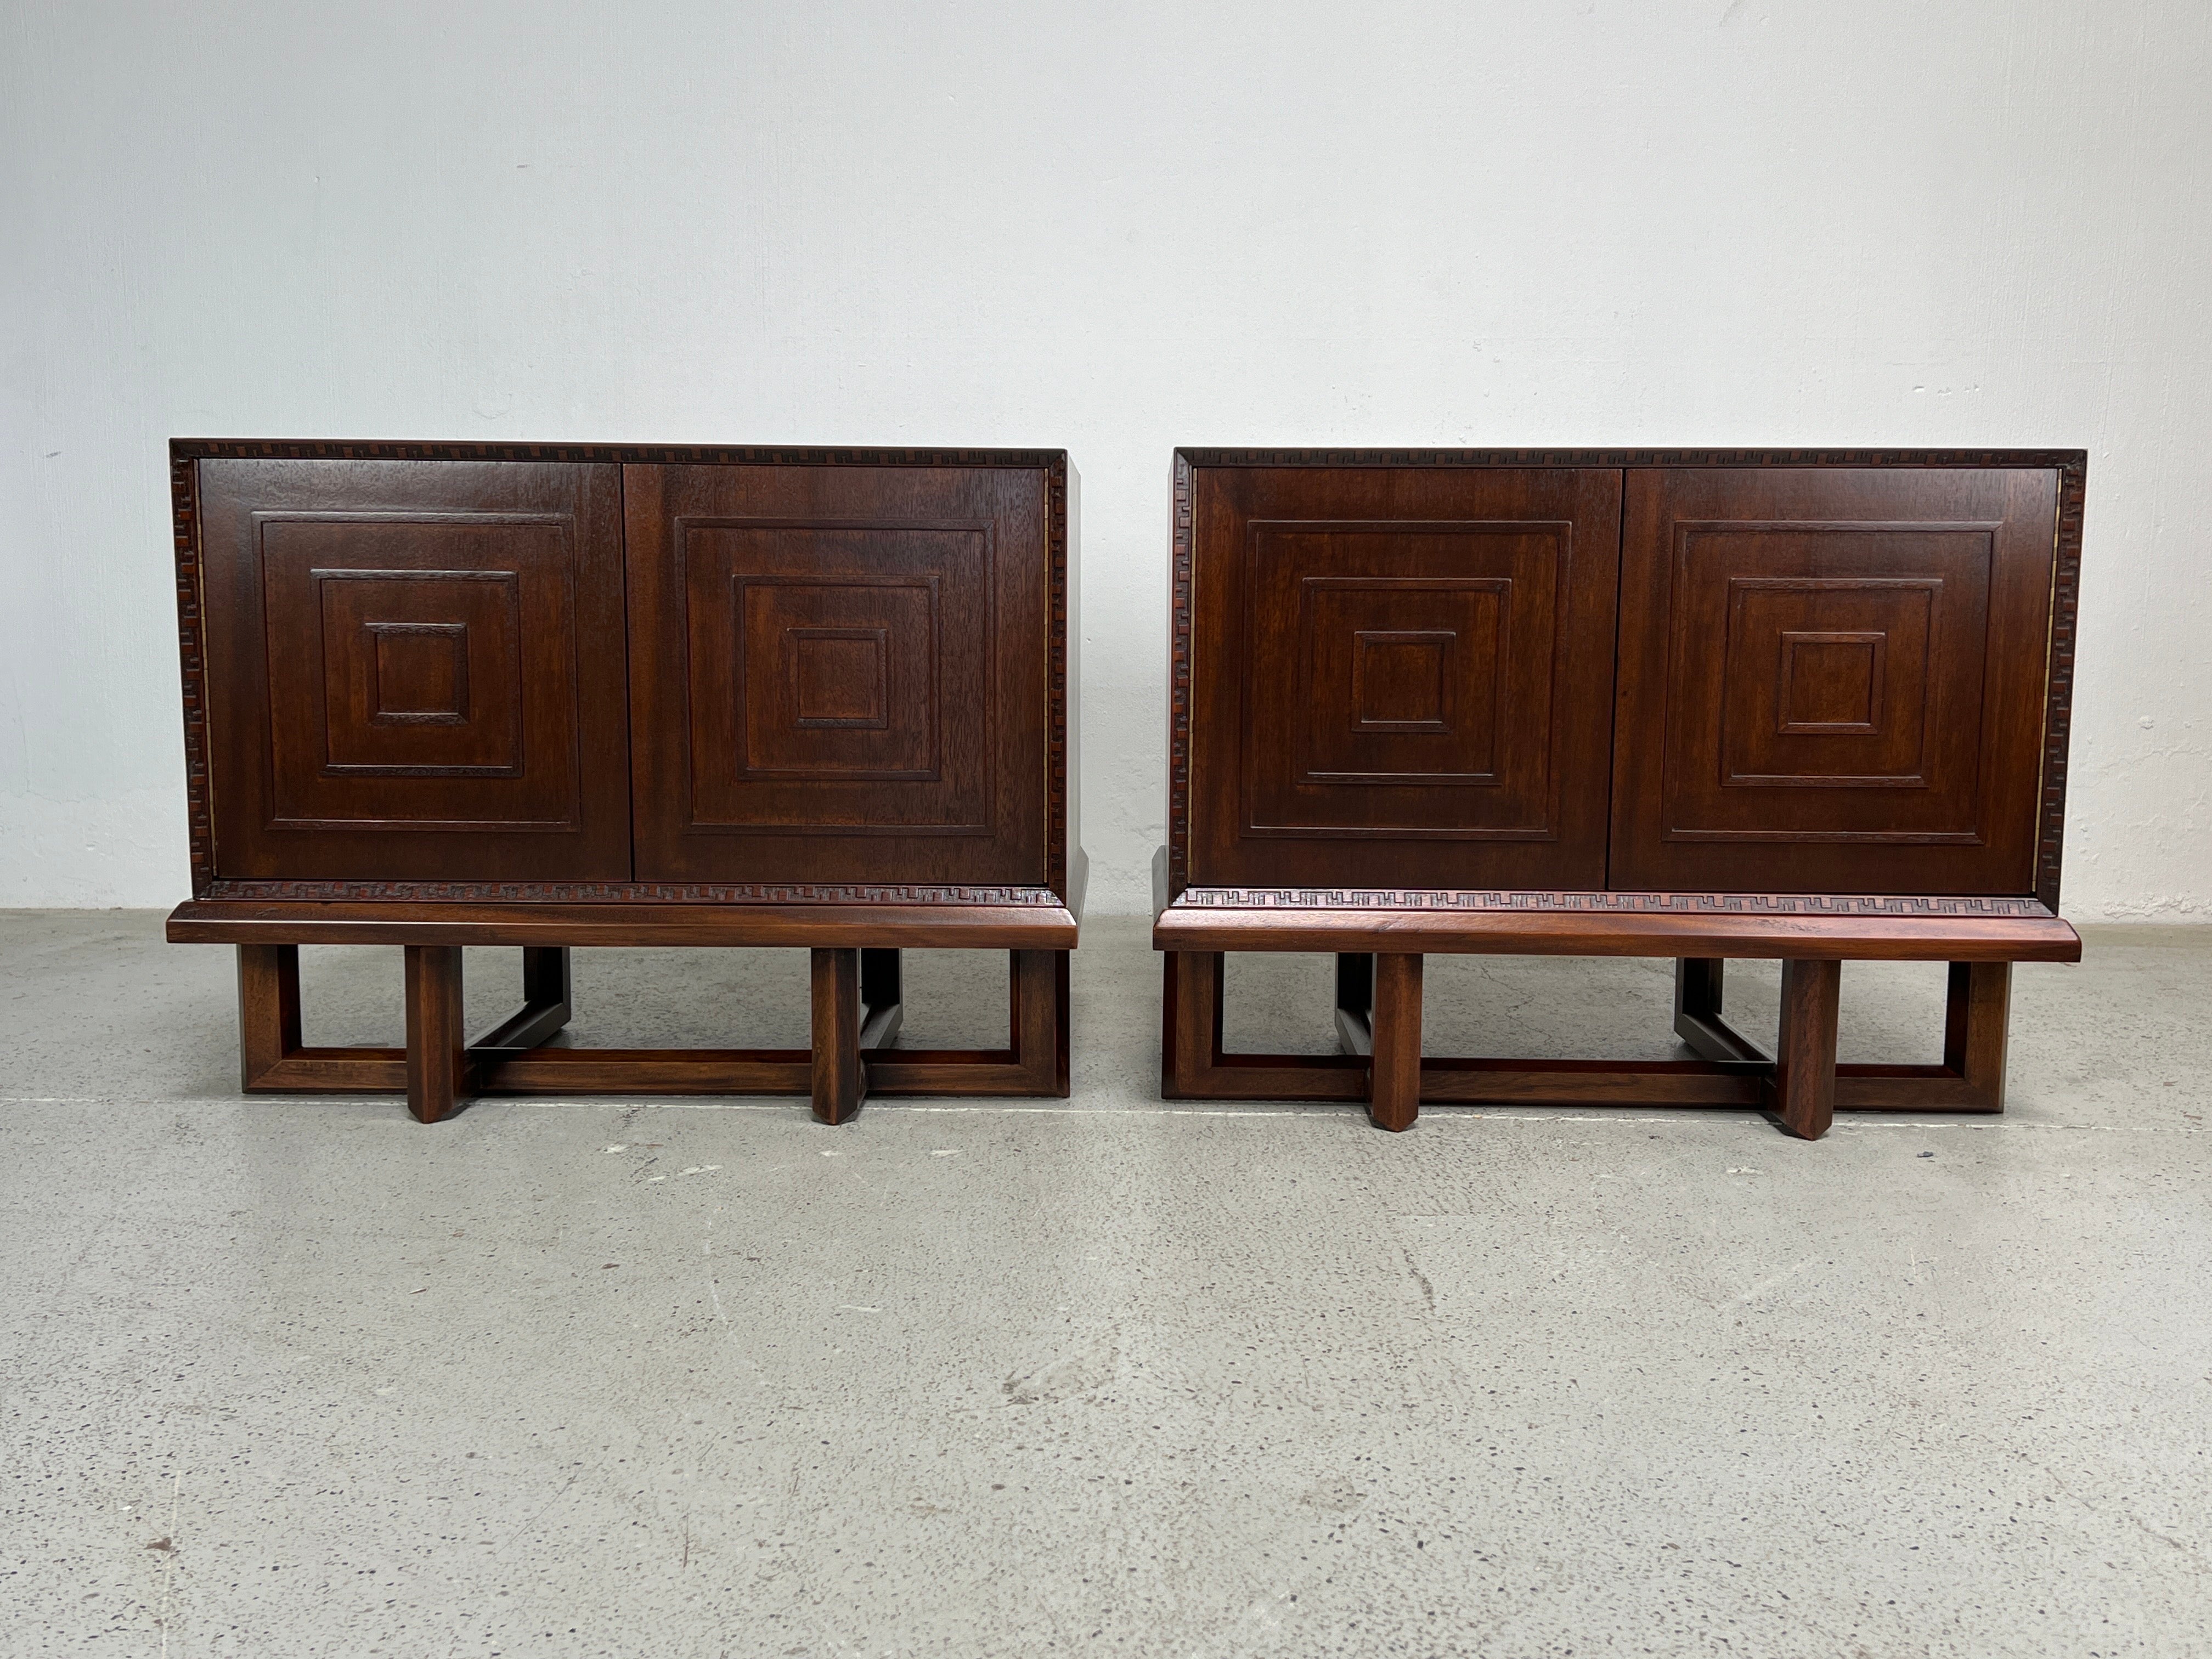 A rare pair of concentric square cabinets on stands designed by Frank Lloyd Wright for Henredon. Each cabinet opens to a single adjustable shelf. 